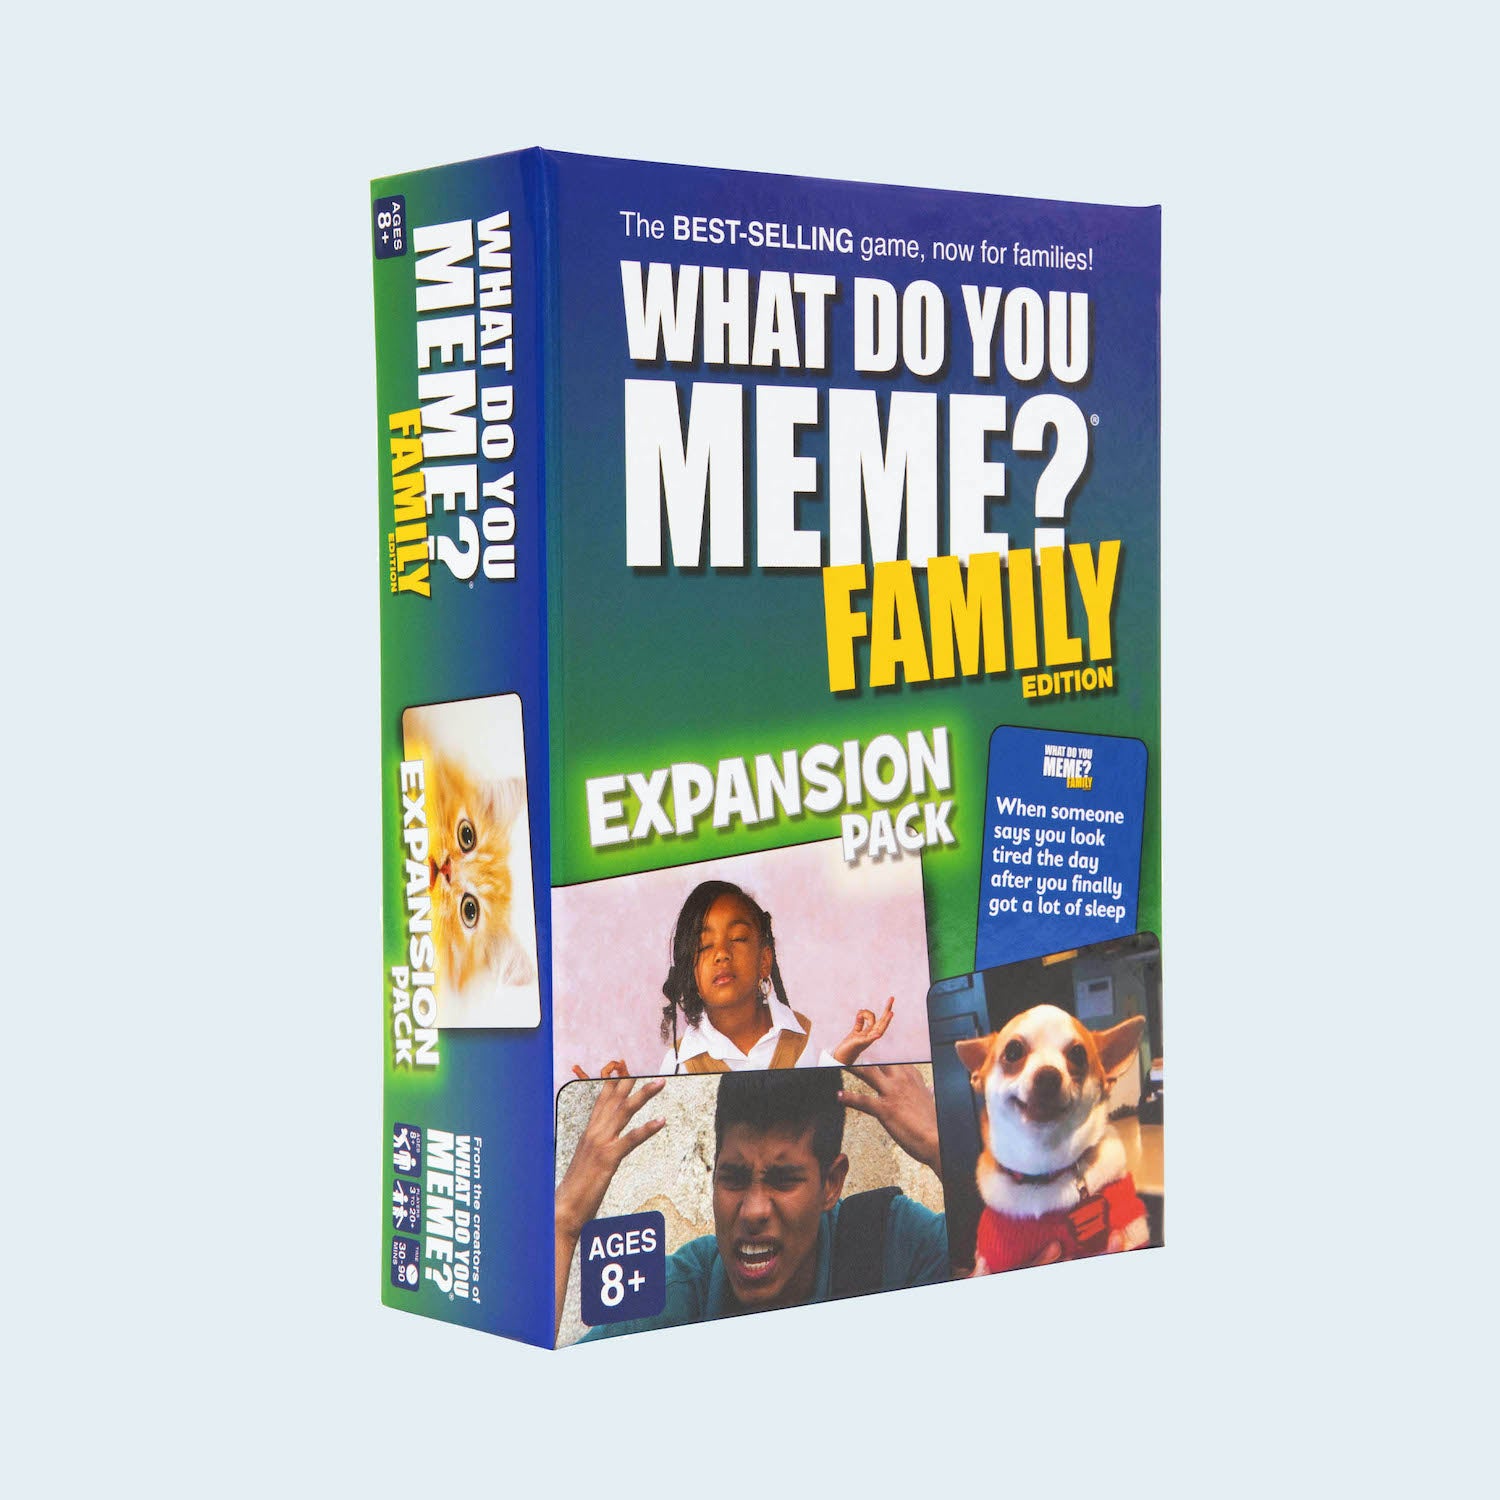 what-do-you-meme-family-edition-expansion-pack-game-box-and-game-play-02-what-do-you-meme-by-relatable